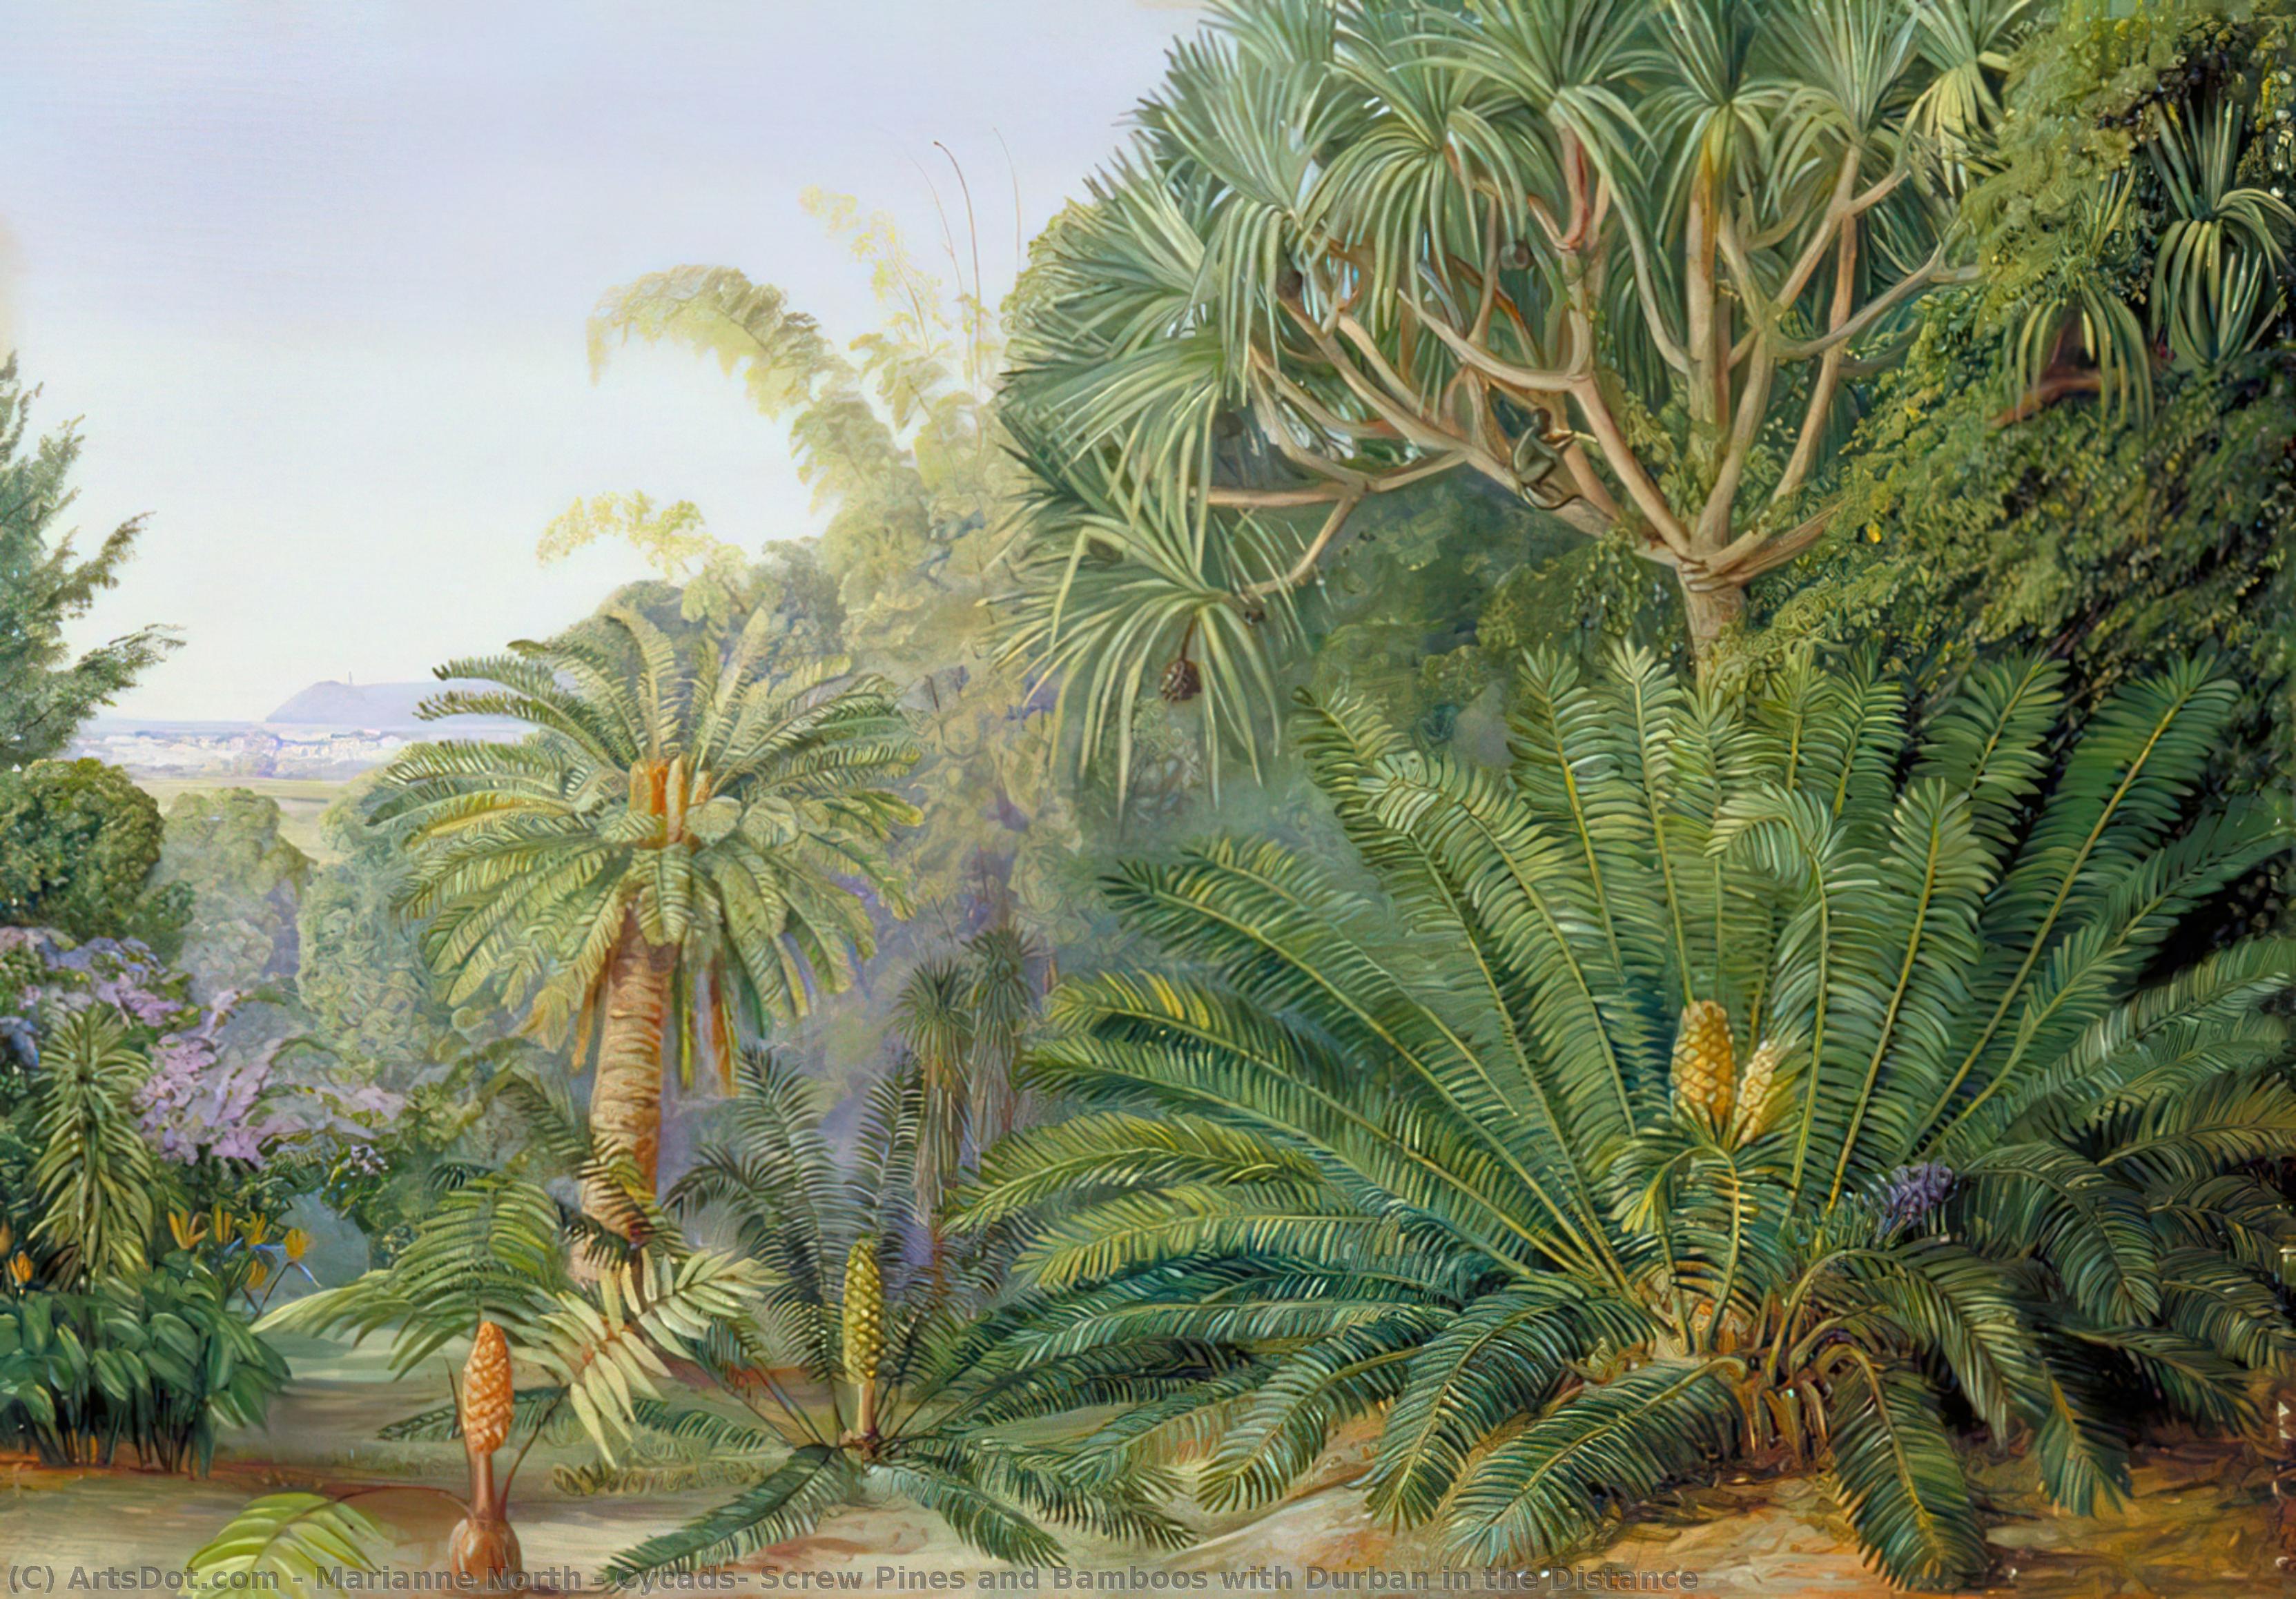 WikiOO.org - 백과 사전 - 회화, 삽화 Marianne North - Cycads, Screw Pines and Bamboos with Durban in the Distance